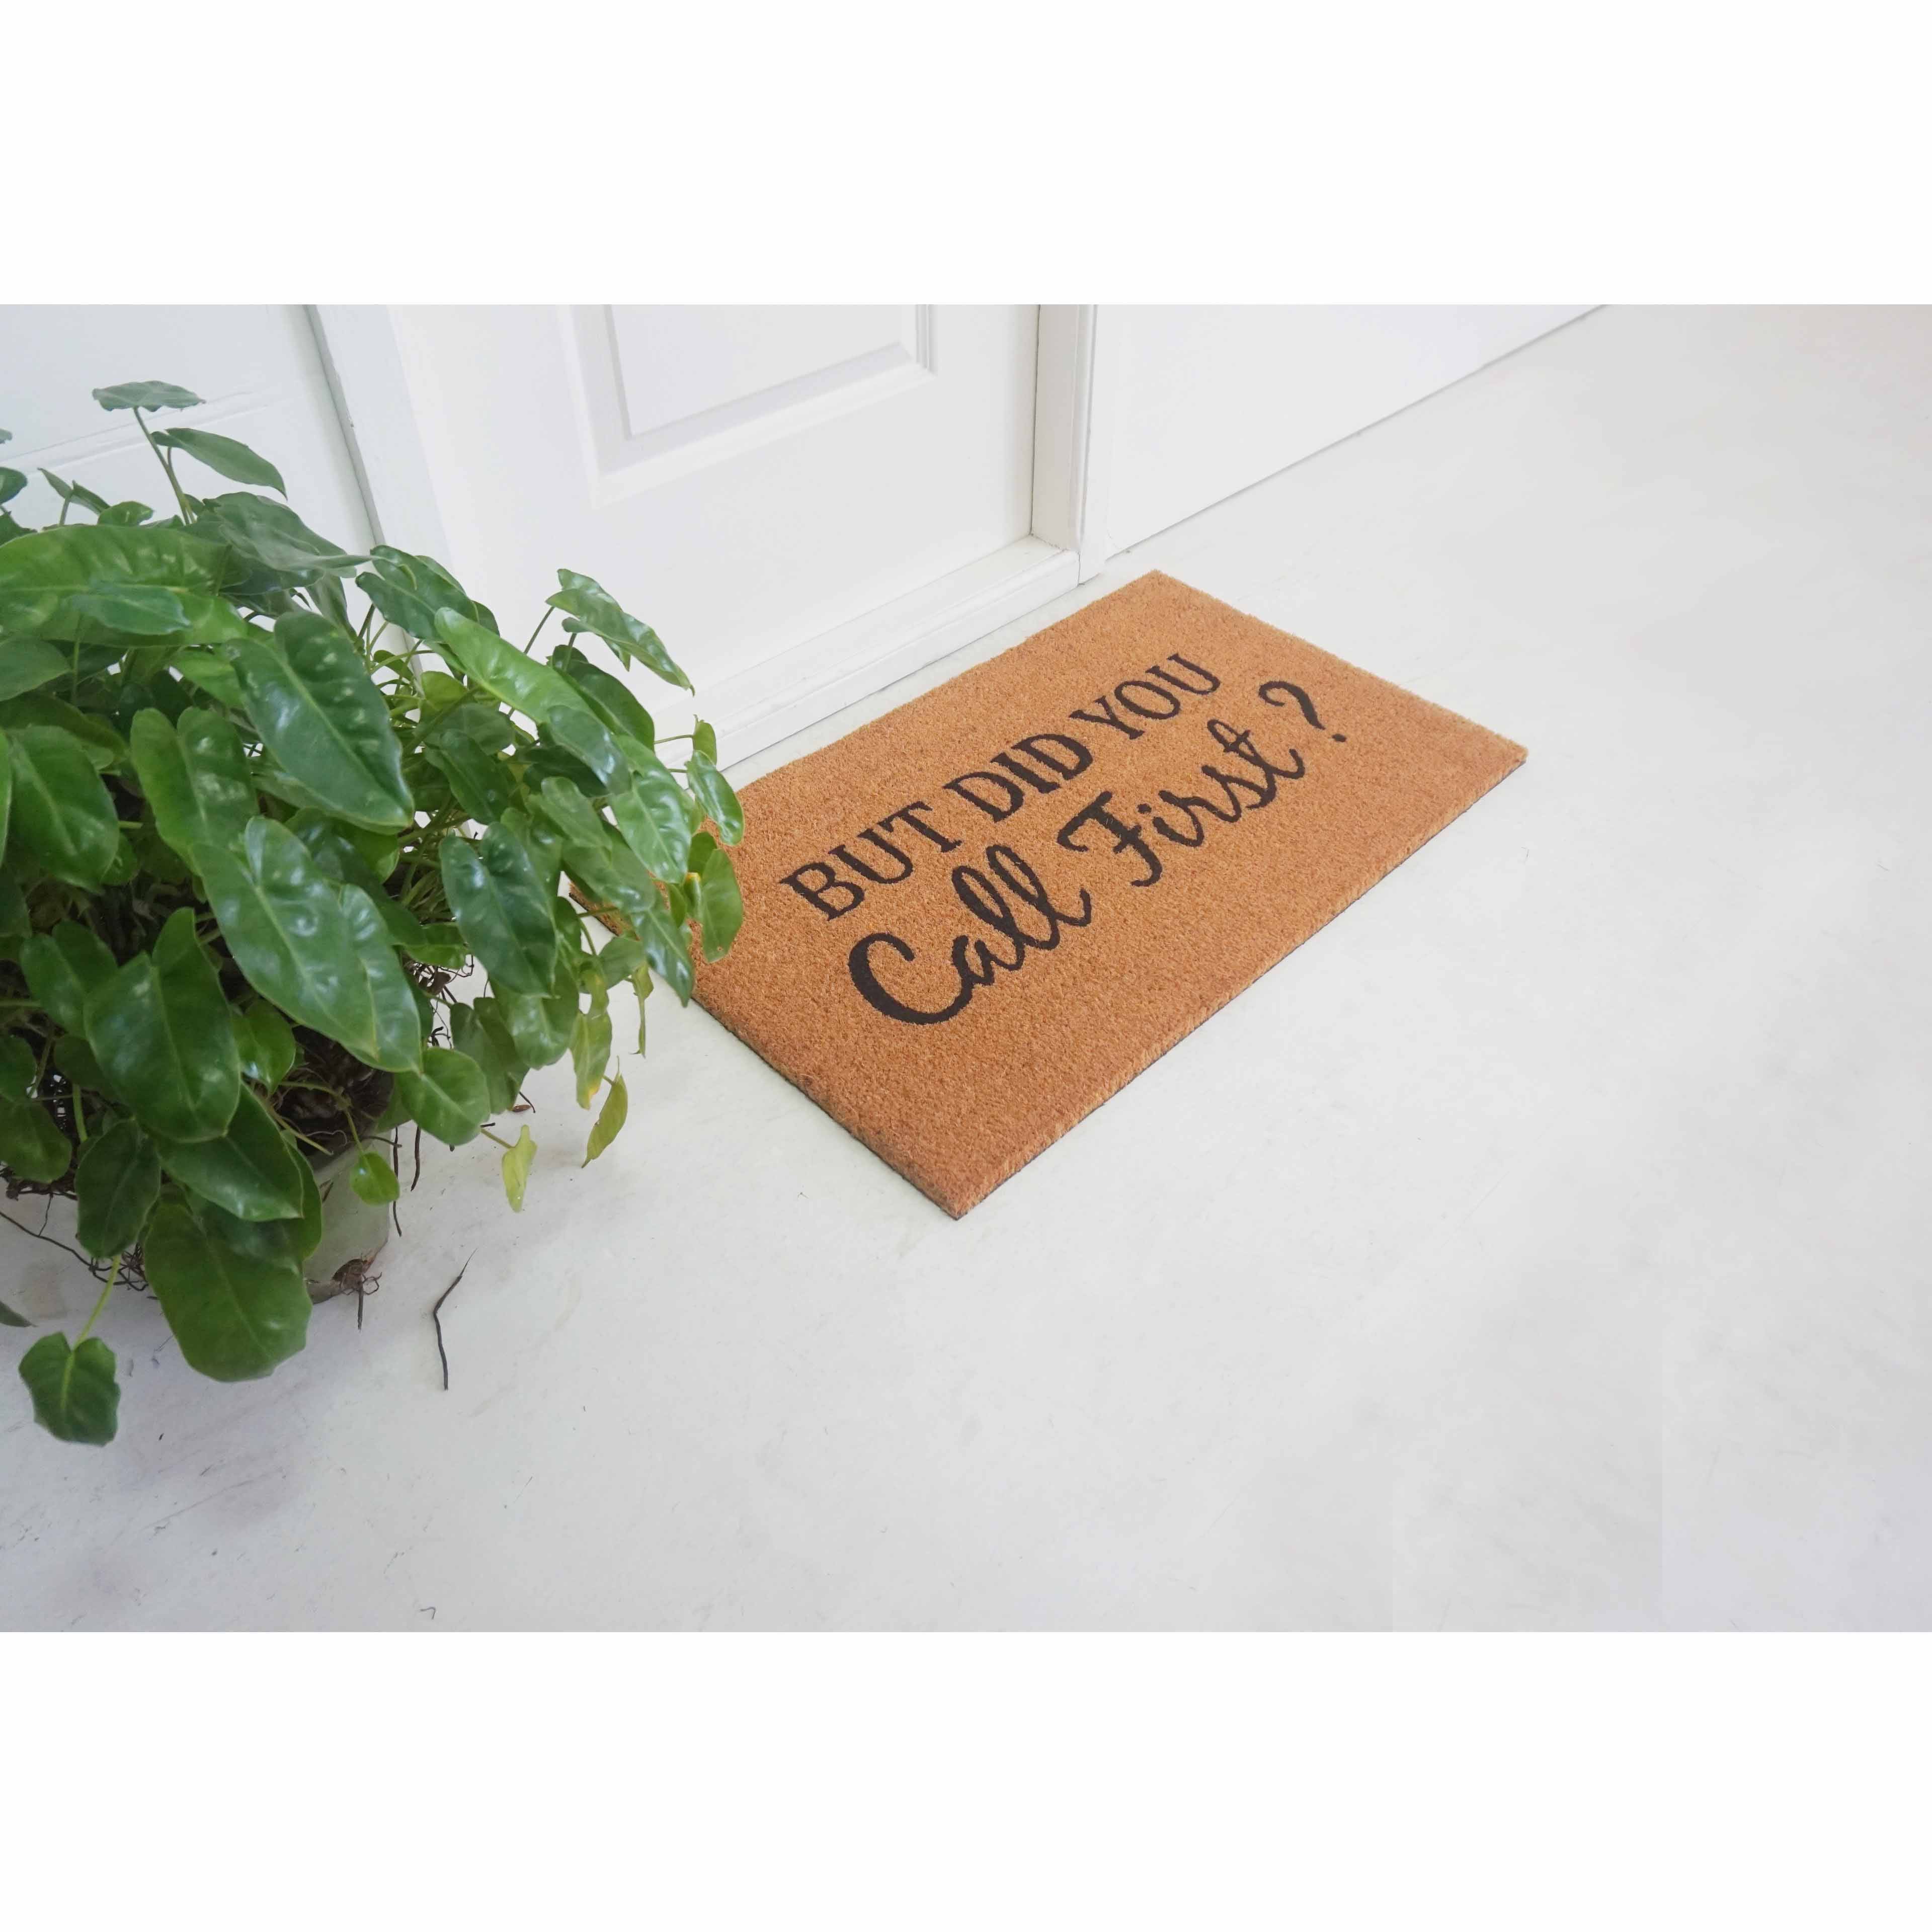 But Did you Call First Doormat by Ashland&#xAE;